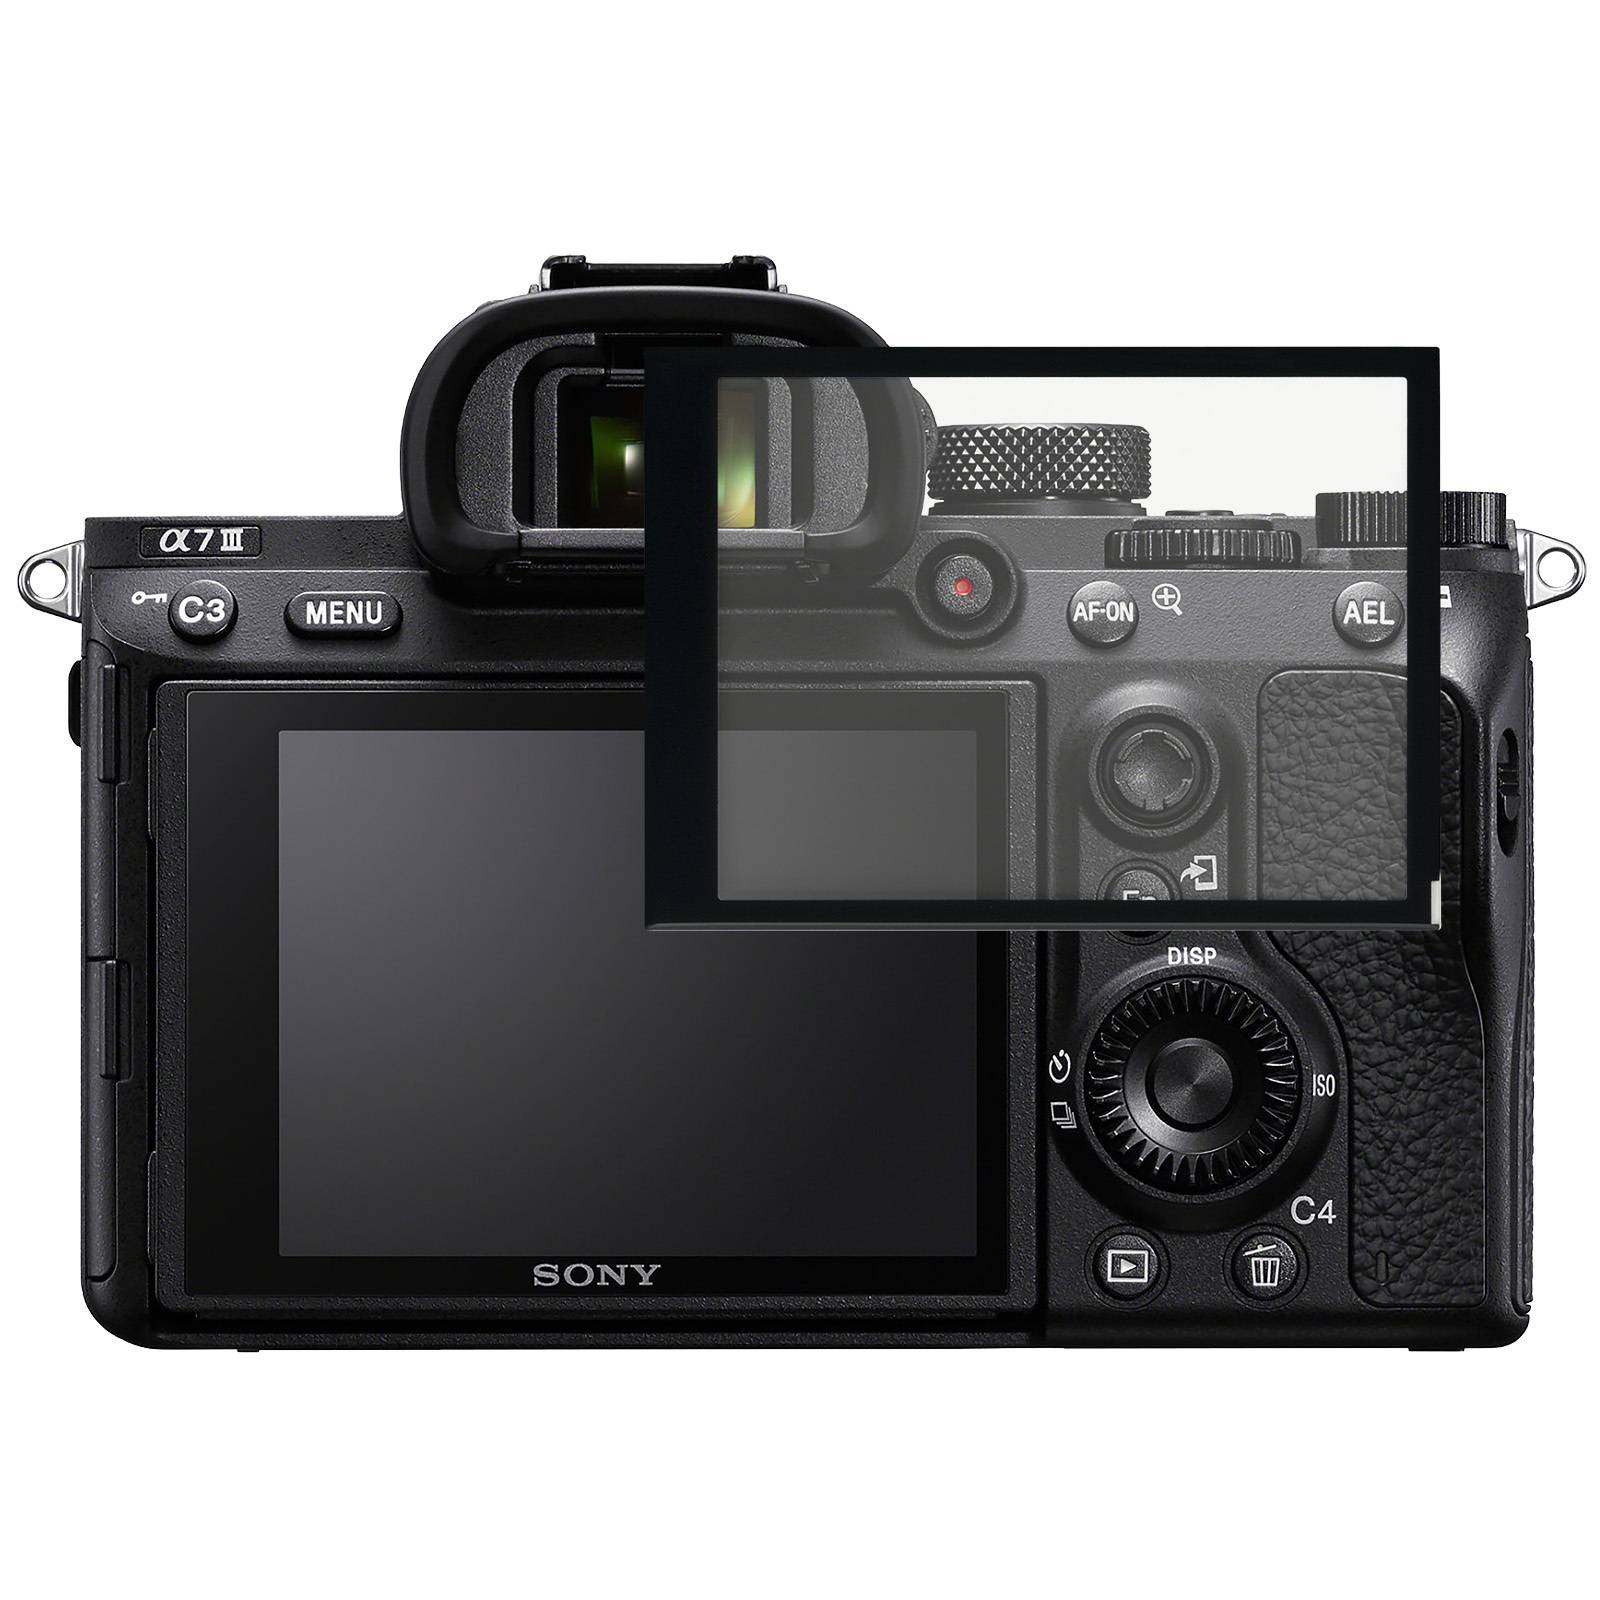 Koah LCD Ultra Armor Screen Protector for Sony a1, a7 II, a7 III, a7R IV and More